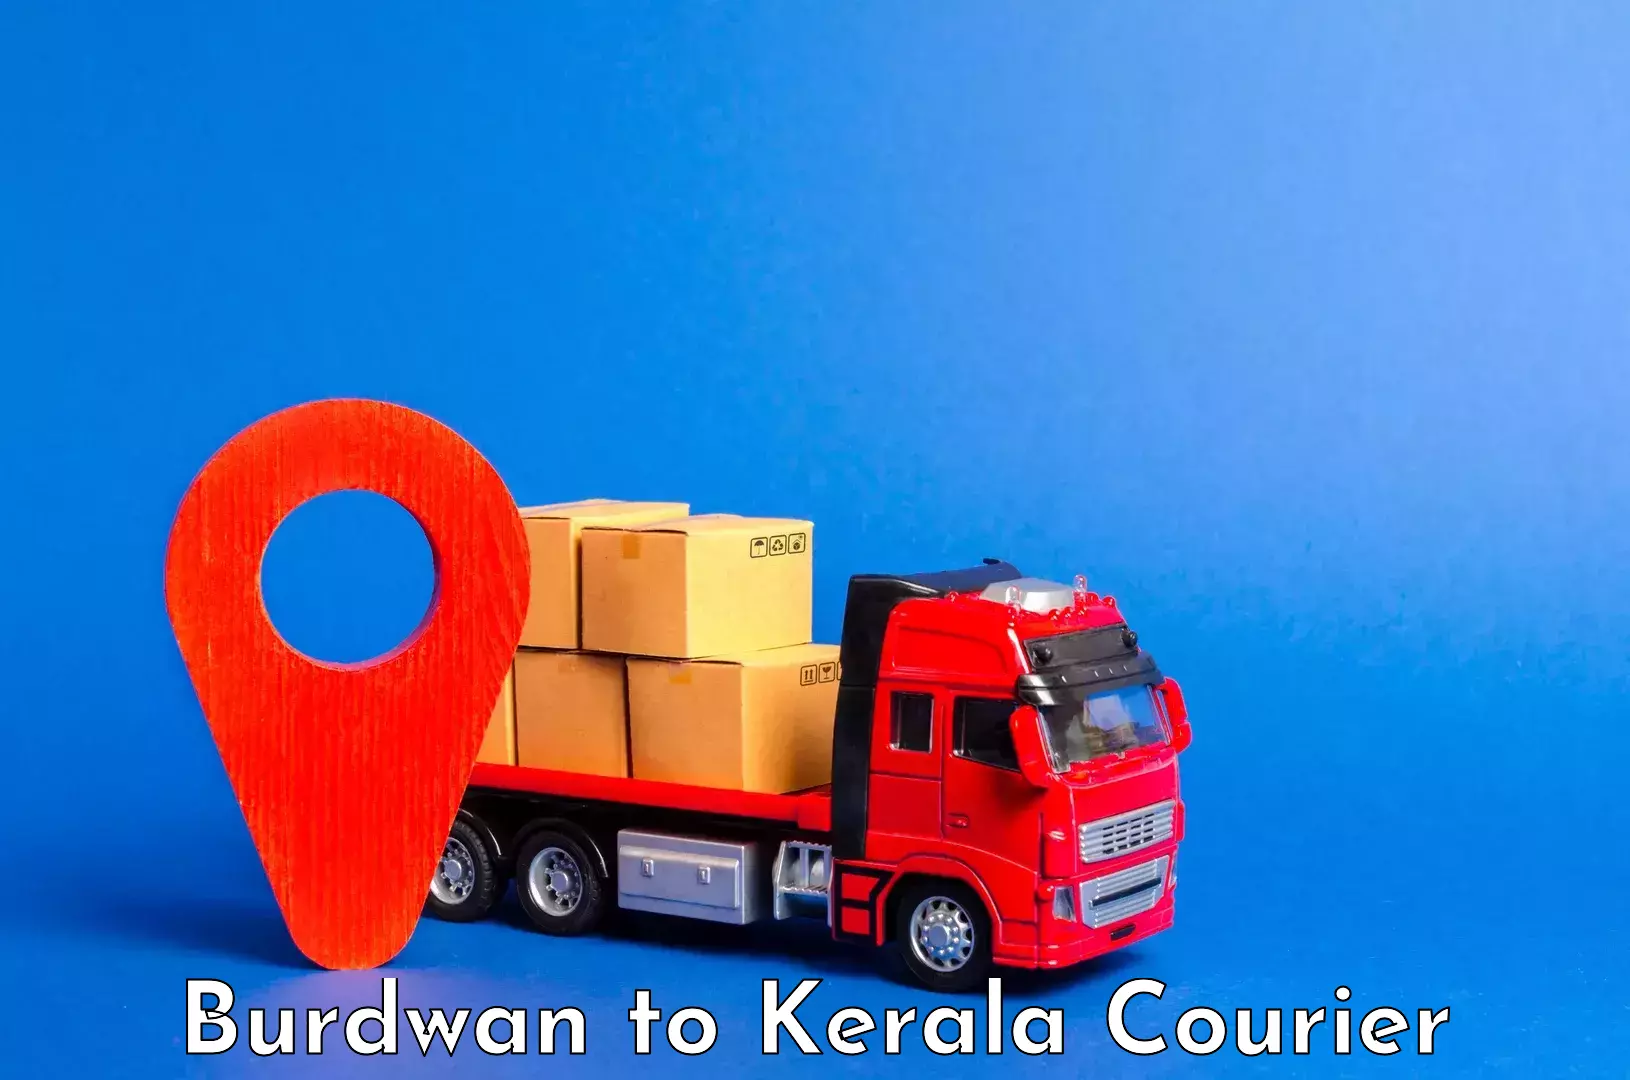 Luggage shipping specialists Burdwan to Thrissur